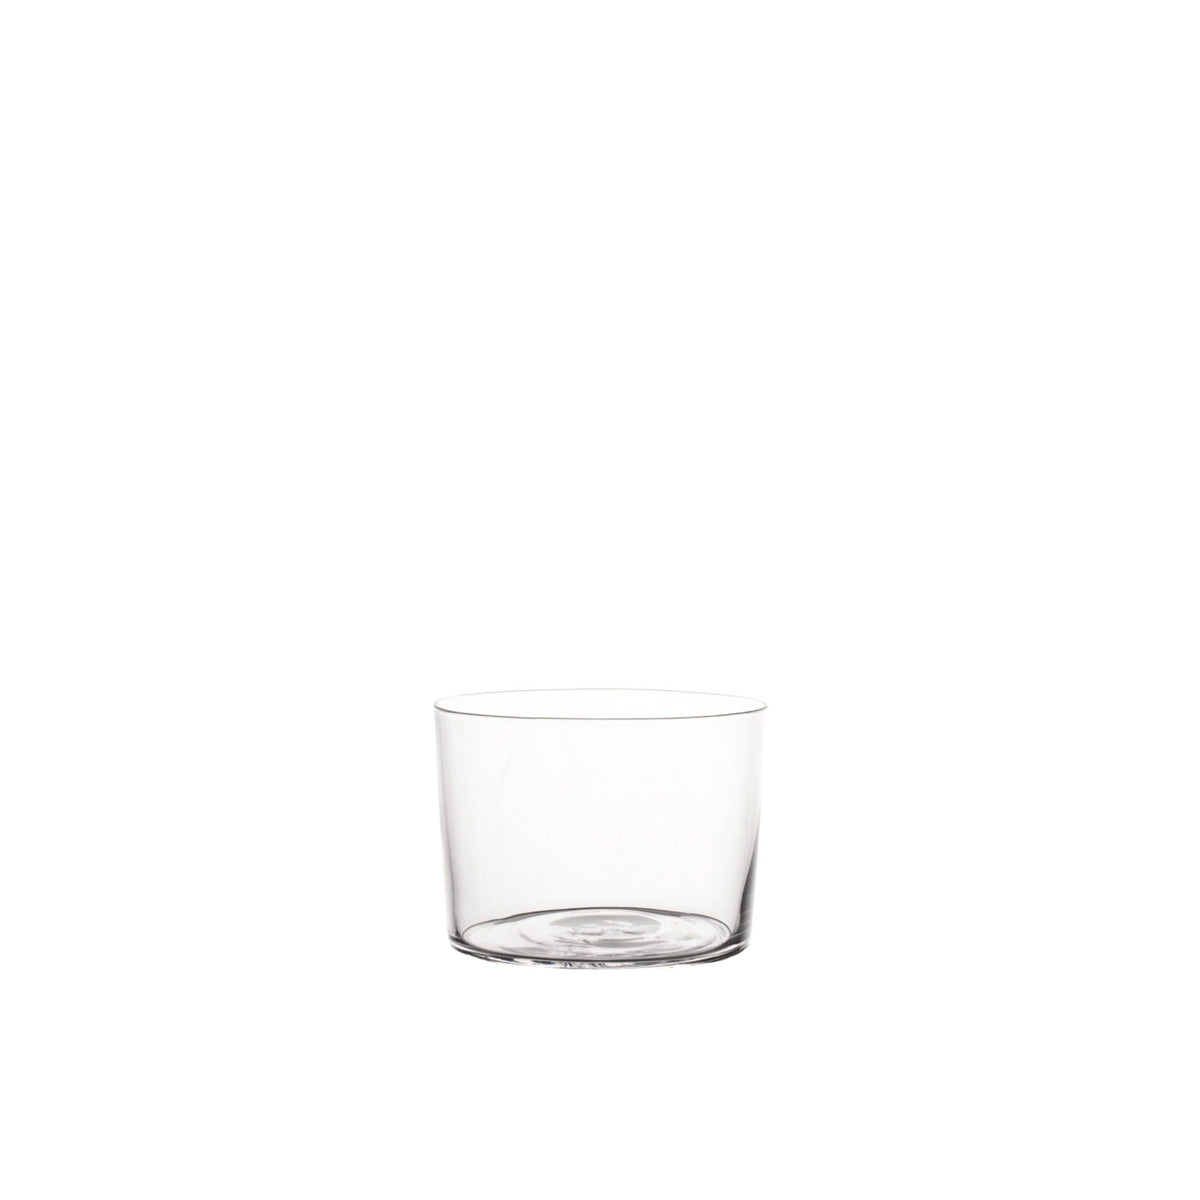 Spanish Beer Glass - Small - 13 oz